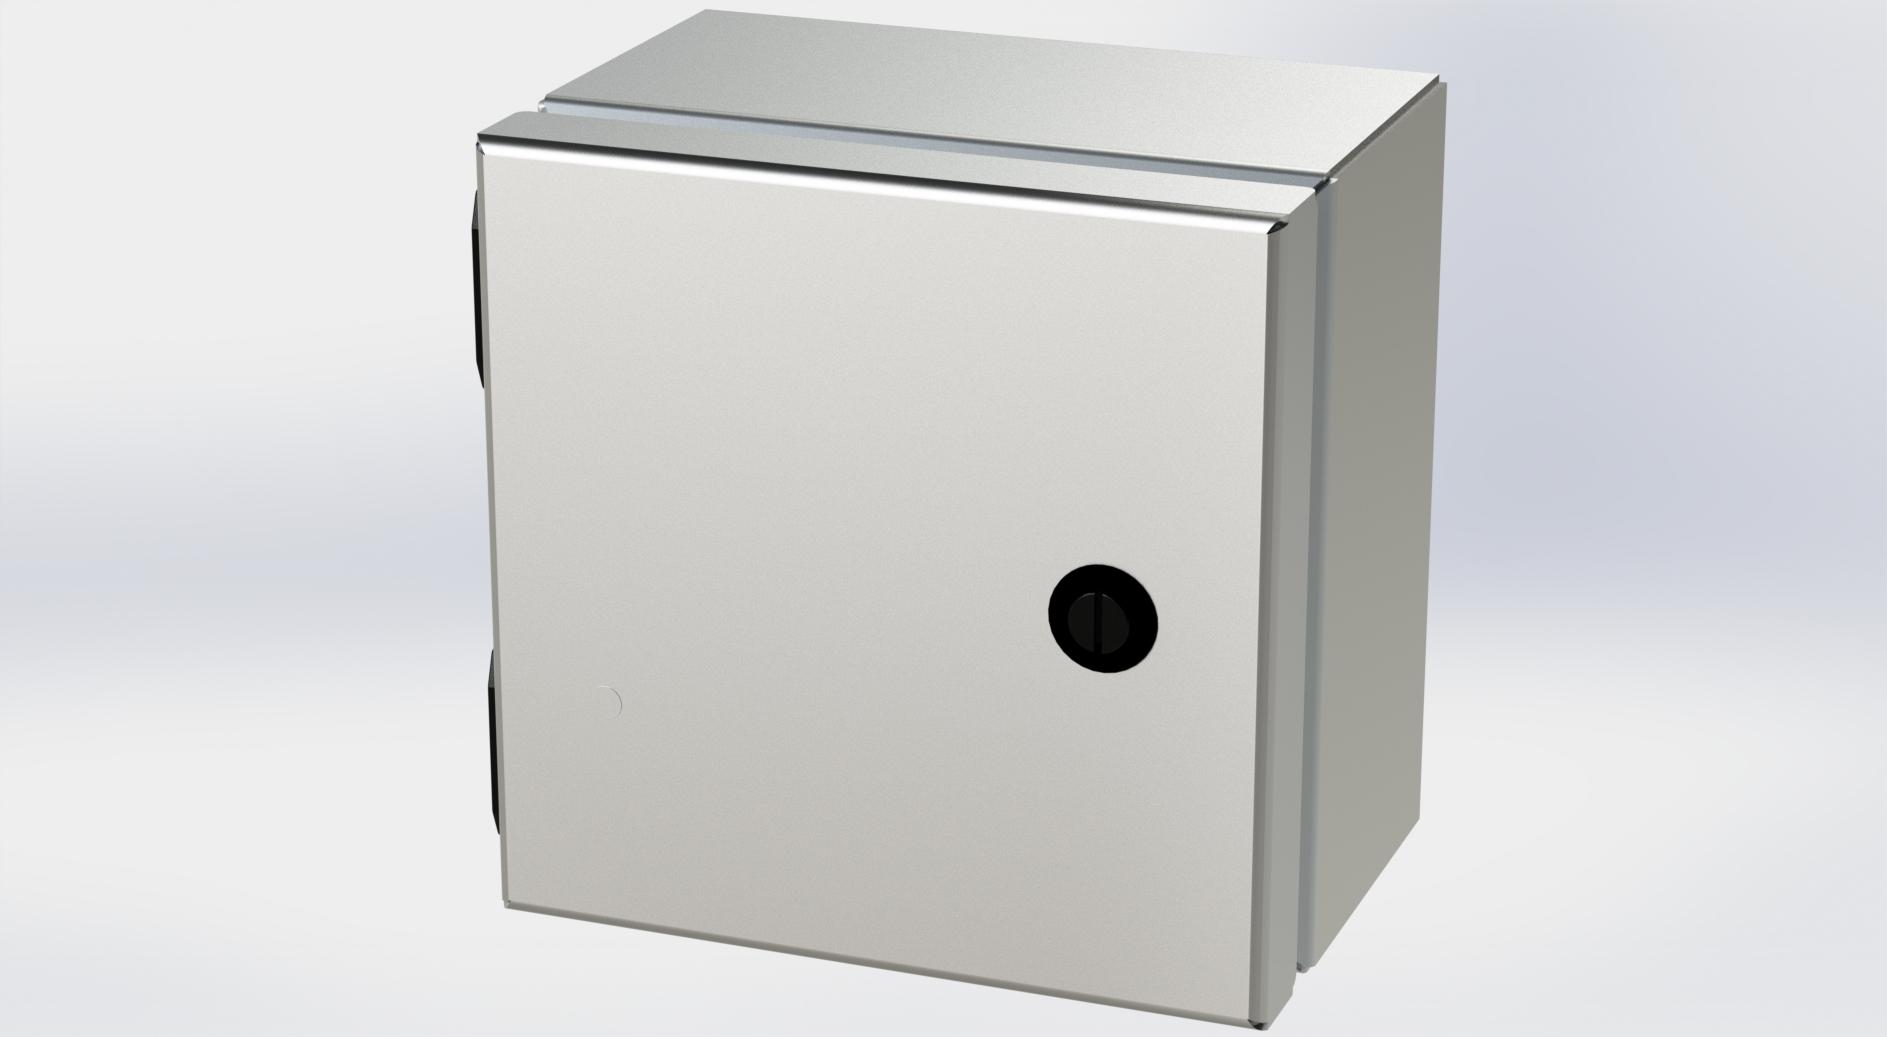 Saginaw Control SCE-606ELJSS6 S.S. ELJ Enclosure, Height:6.00", Width:6.00", Depth:4.00", #4 brushed finish on all exterior surfaces. Optional sub-panels are powder coated white.